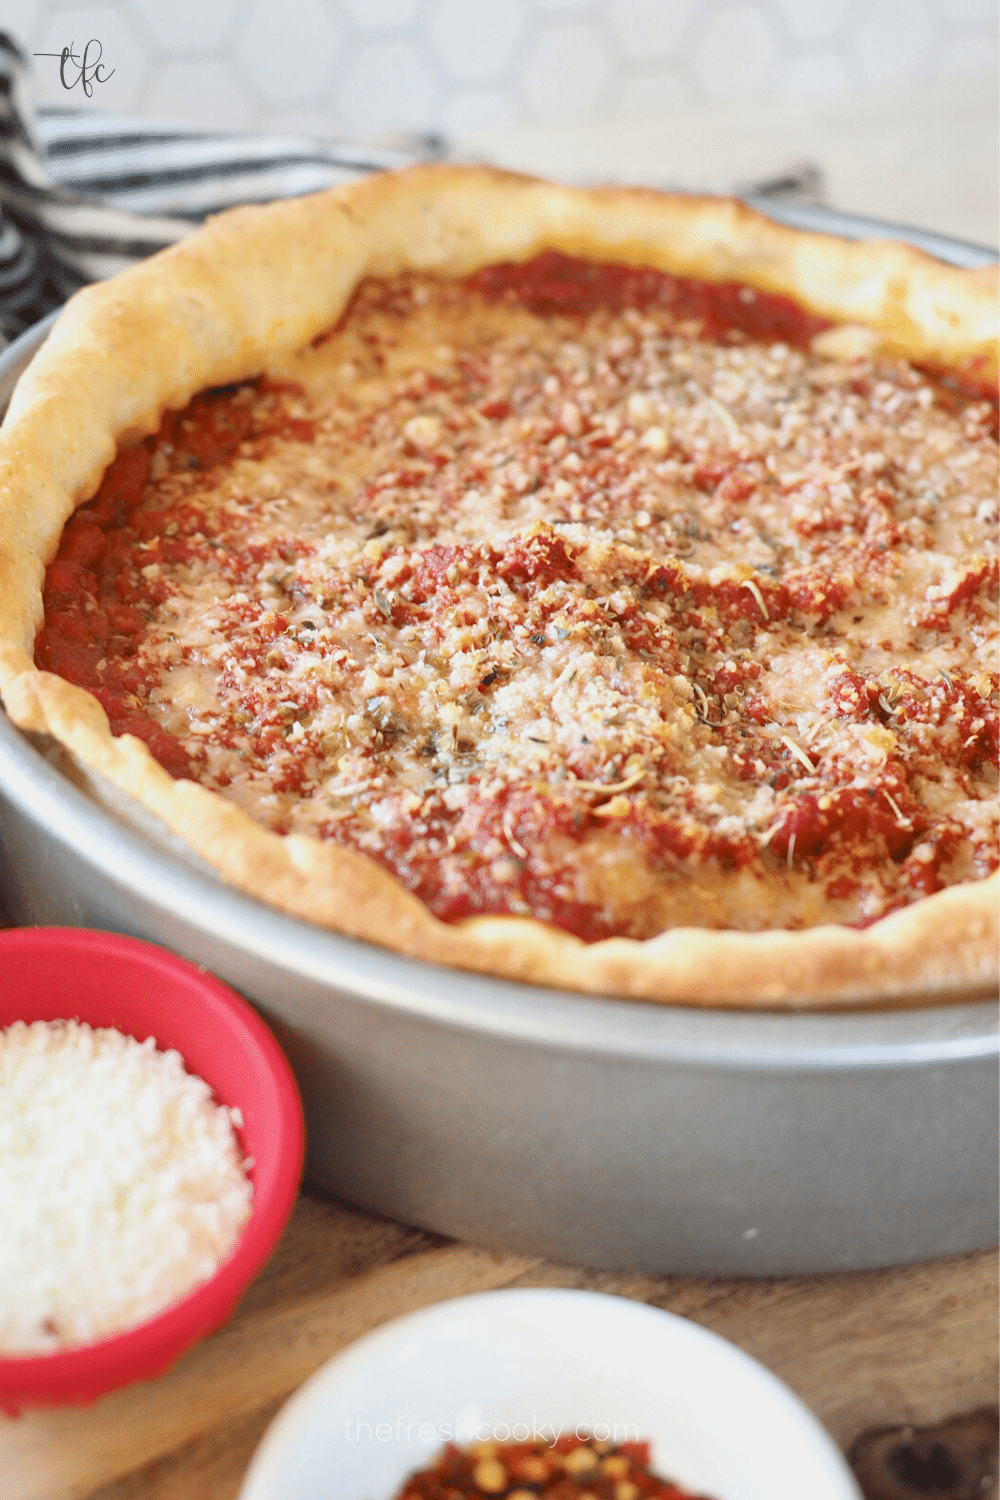 Chicago Deep dish pizza covered in a rich marinara sauce.